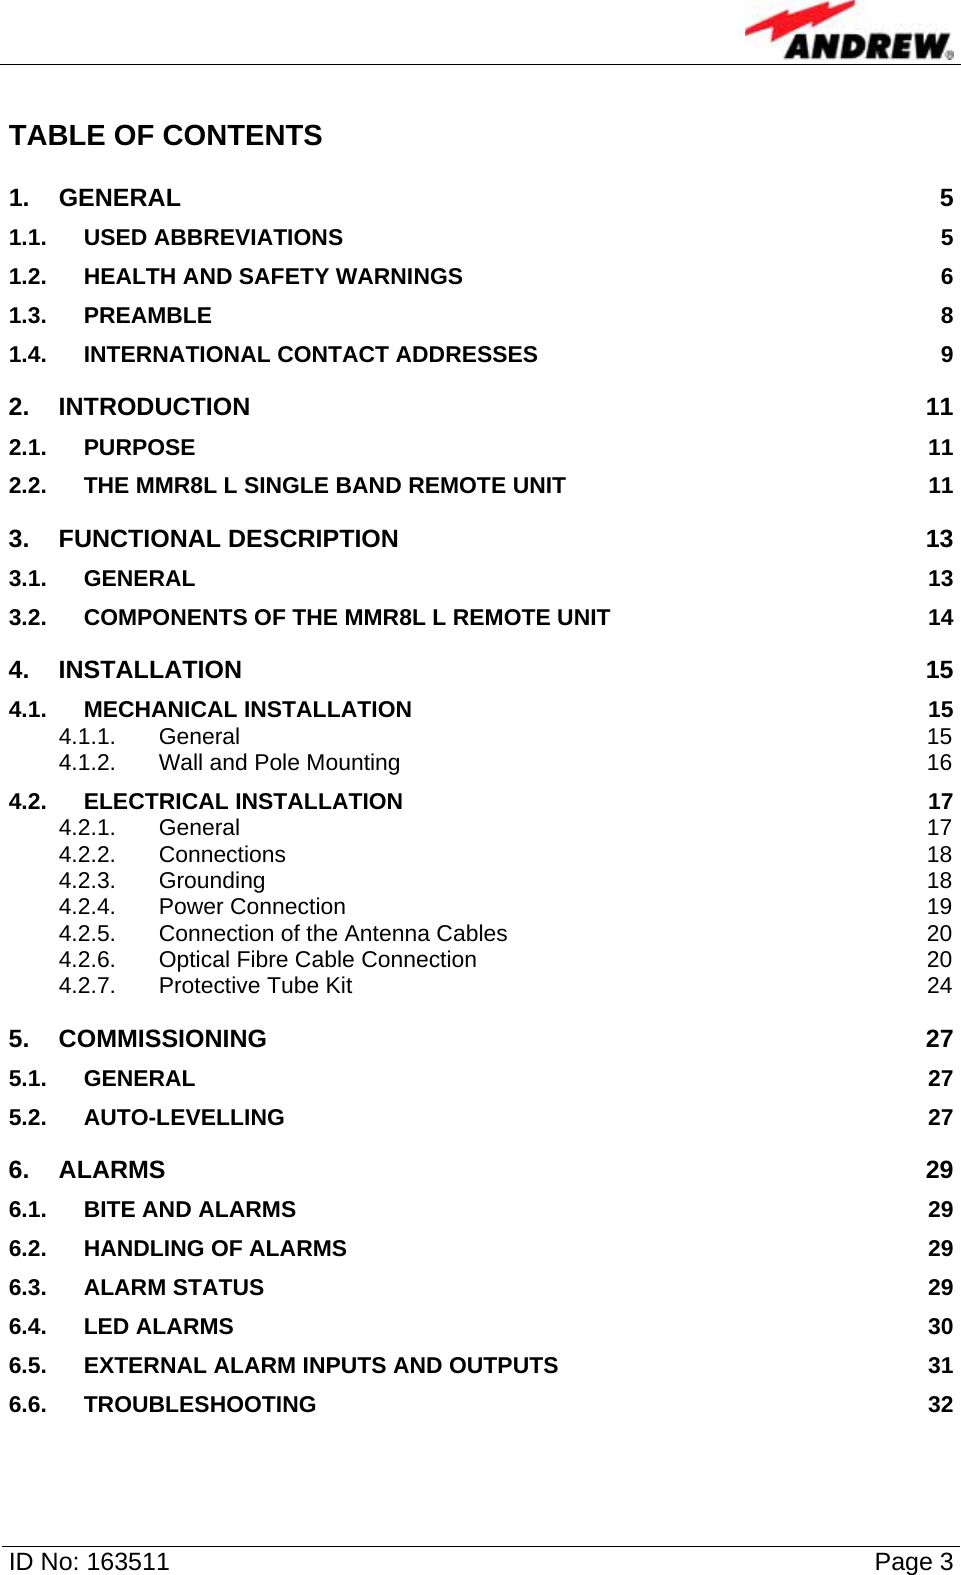   ID No: 163511      Page 3 TABLE OF CONTENTS 1. GENERAL 5 1.1. USED ABBREVIATIONS  5 1.2. HEALTH AND SAFETY WARNINGS  6 1.3. PREAMBLE 8 1.4. INTERNATIONAL CONTACT ADDRESSES  9 2. INTRODUCTION 11 2.1. PURPOSE 11 2.2. THE MMR8L L SINGLE BAND REMOTE UNIT  11 3. FUNCTIONAL DESCRIPTION  13 3.1. GENERAL 13 3.2. COMPONENTS OF THE MMR8L L REMOTE UNIT  14 4. INSTALLATION 15 4.1. MECHANICAL INSTALLATION  15 4.1.1. General 15 4.1.2. Wall and Pole Mounting  16 4.2. ELECTRICAL INSTALLATION  17 4.2.1. General 17 4.2.2. Connections 18 4.2.3. Grounding 18 4.2.4. Power Connection  19 4.2.5. Connection of the Antenna Cables  20 4.2.6. Optical Fibre Cable Connection  20 4.2.7. Protective Tube Kit  24 5. COMMISSIONING 27 5.1. GENERAL 27 5.2. AUTO-LEVELLING 27 6. ALARMS 29 6.1. BITE AND ALARMS  29 6.2. HANDLING OF ALARMS  29 6.3. ALARM STATUS  29 6.4. LED ALARMS  30 6.5. EXTERNAL ALARM INPUTS AND OUTPUTS  31 6.6. TROUBLESHOOTING 32 